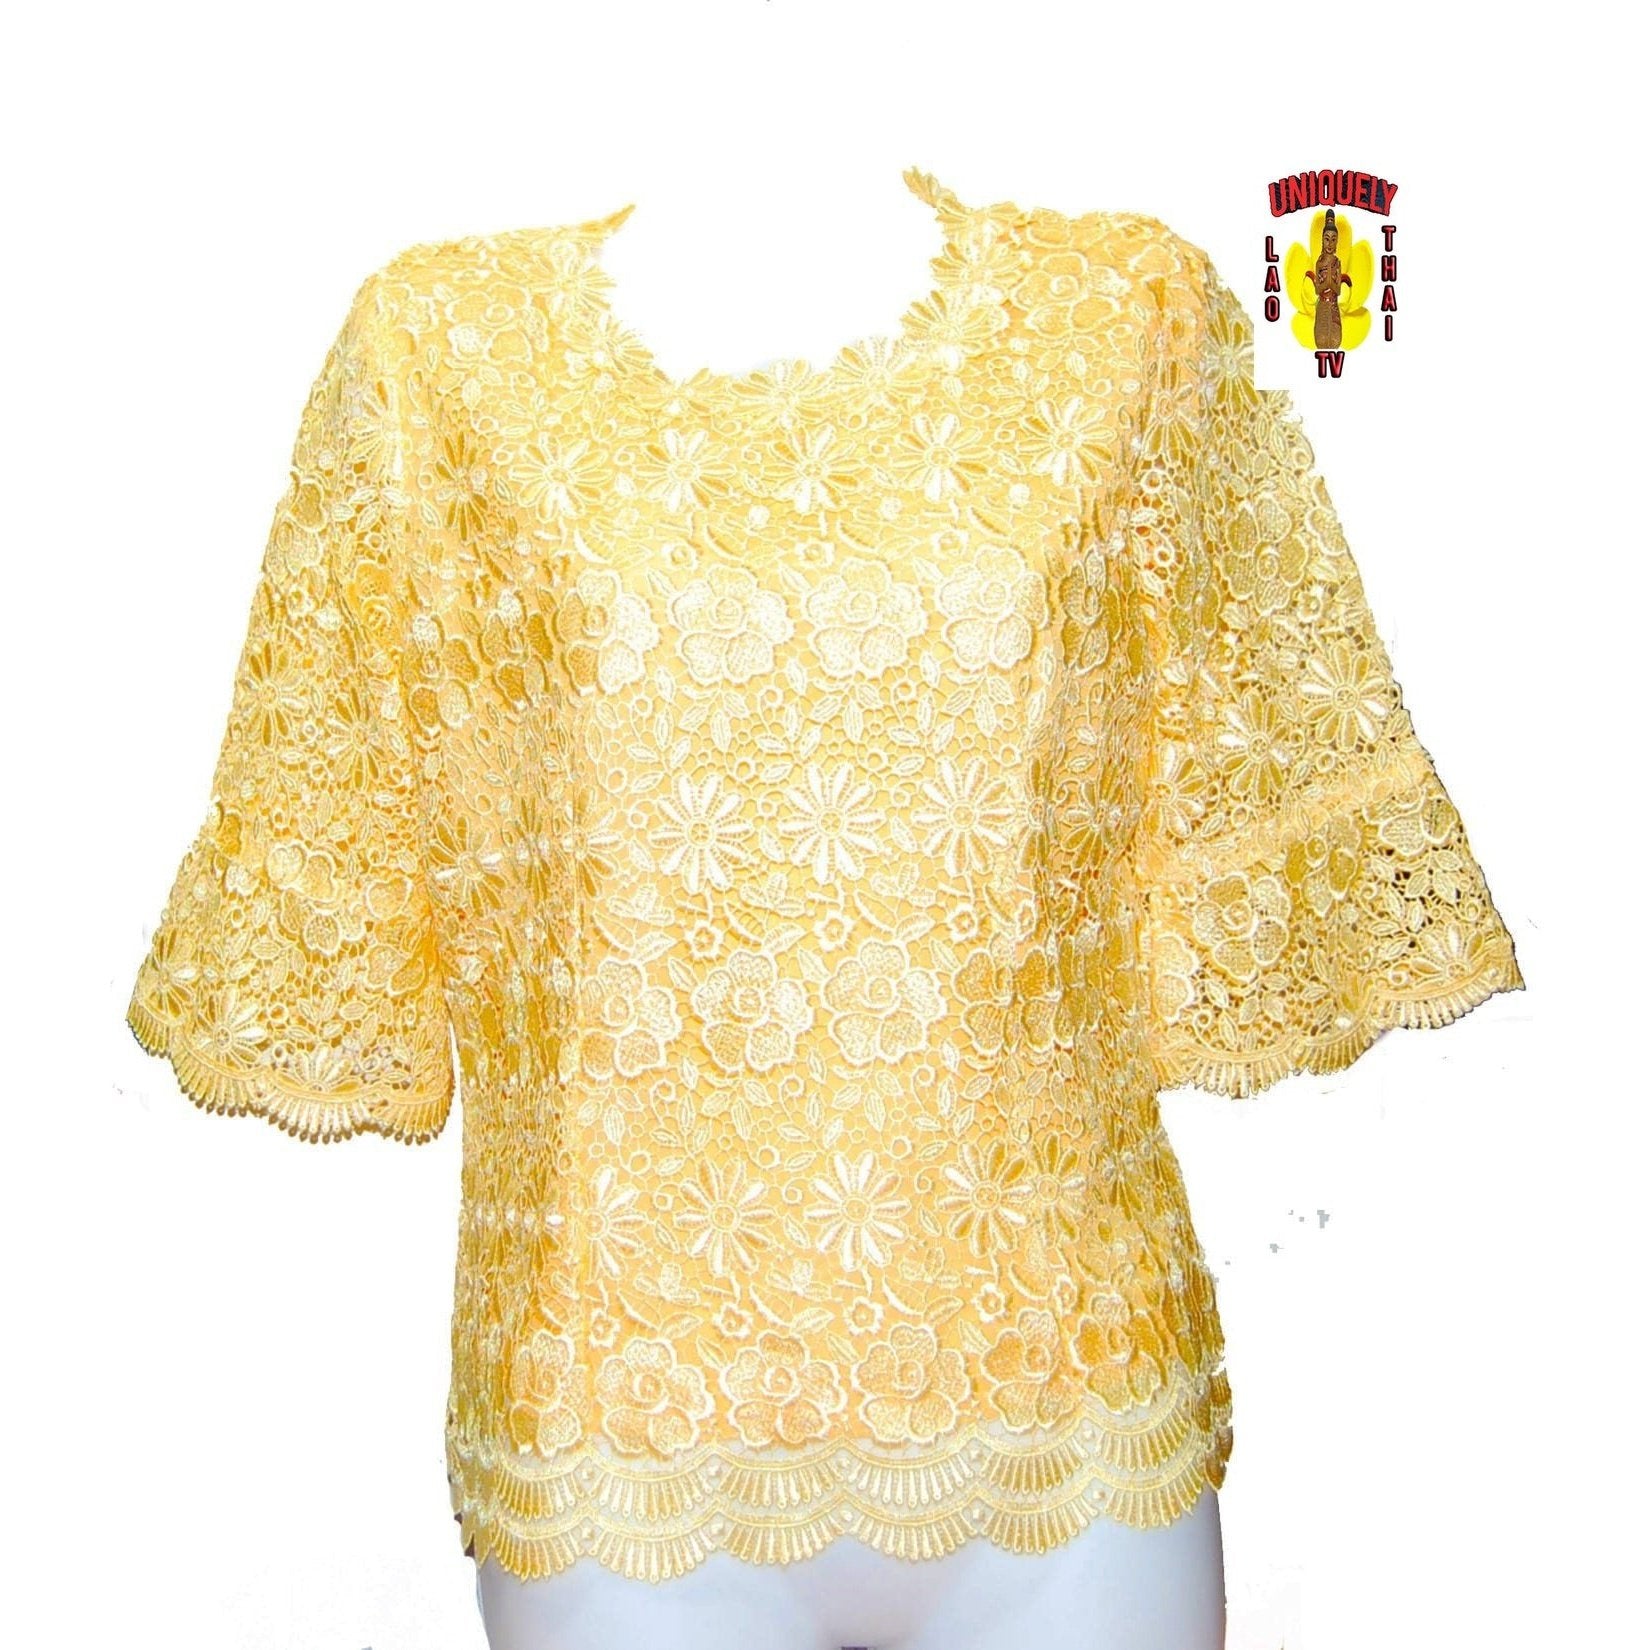 Traditional Thai Laos Lace Blouse Yellow